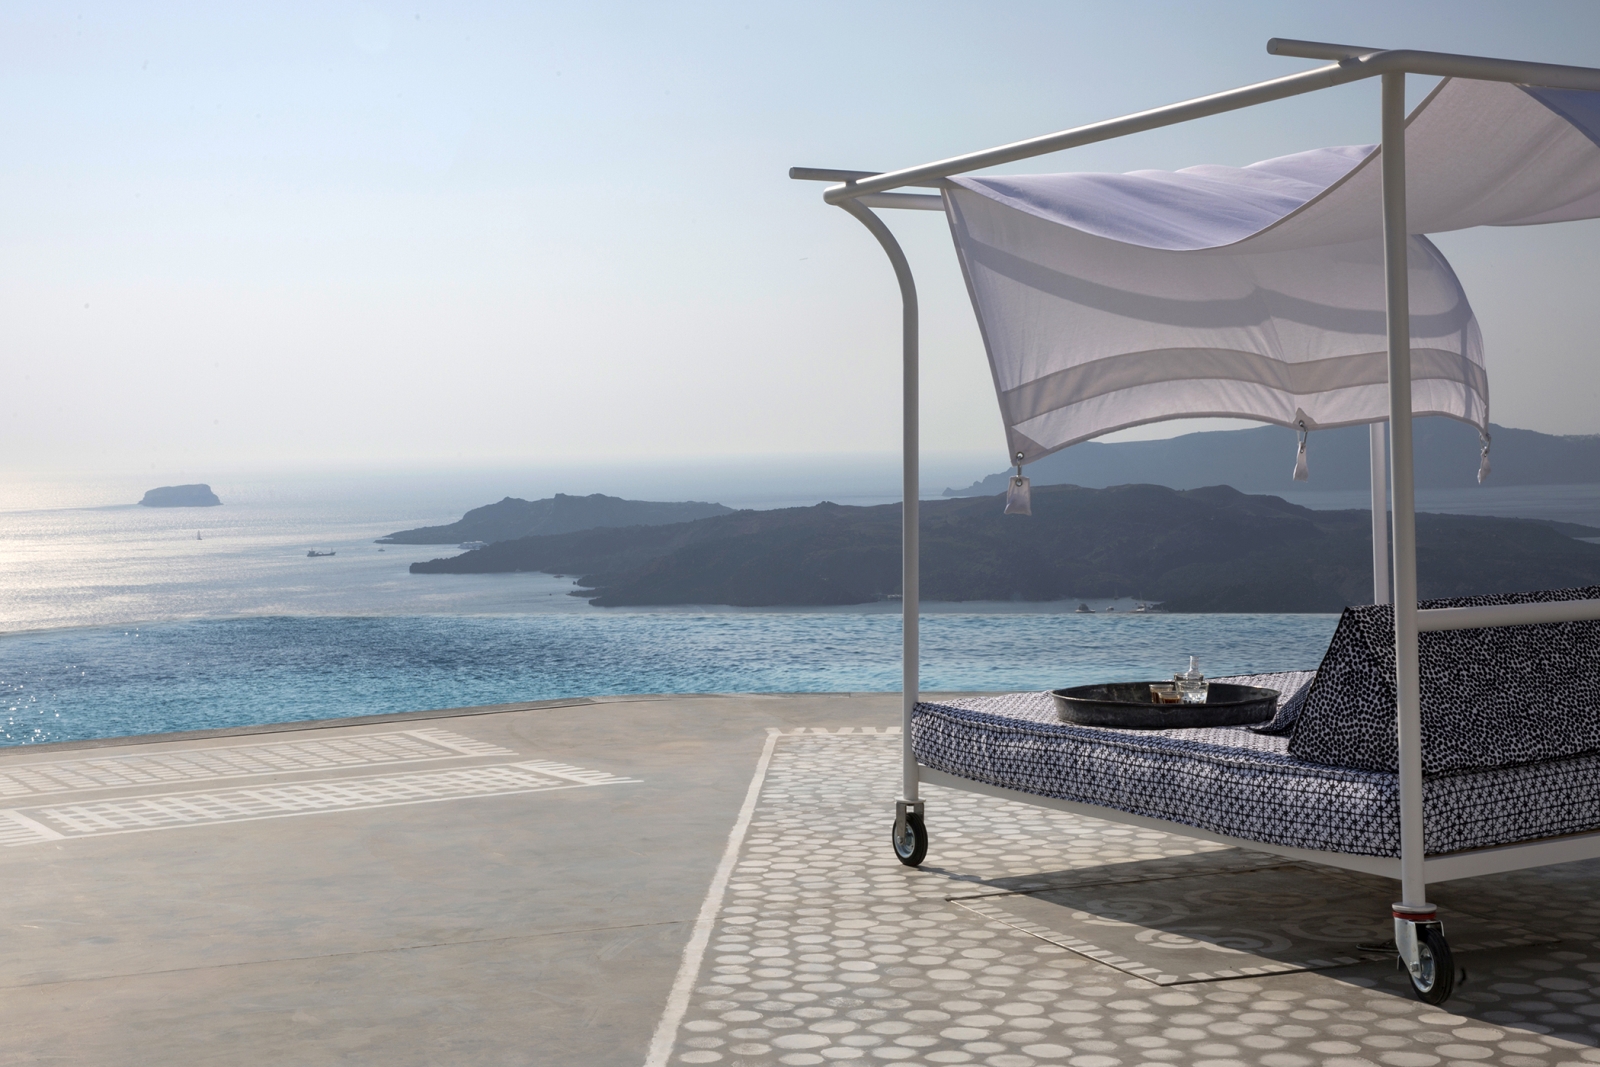 Day bed with sea view on terrace by infinity pool at Erosantorini on Santorini, Greece